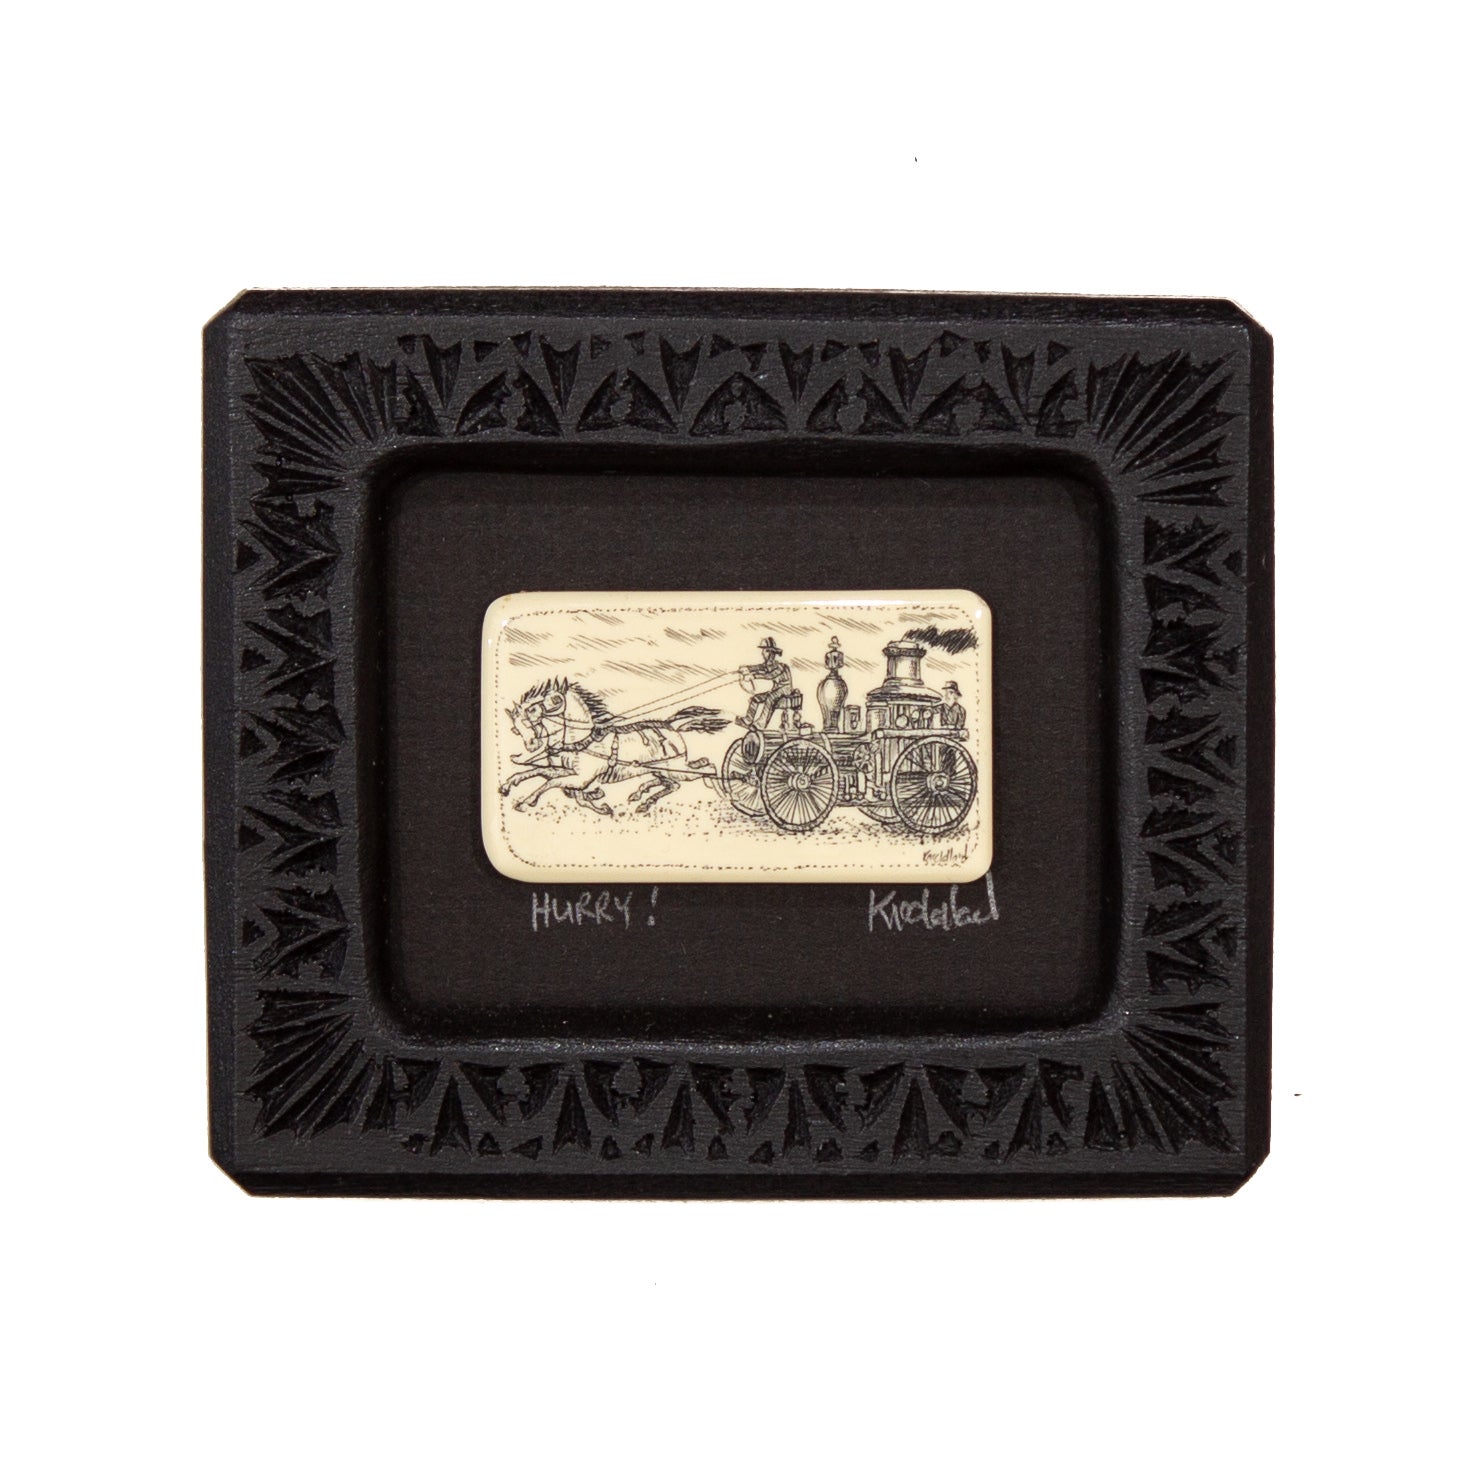 "Hurry!" Small Chip Carved Frame